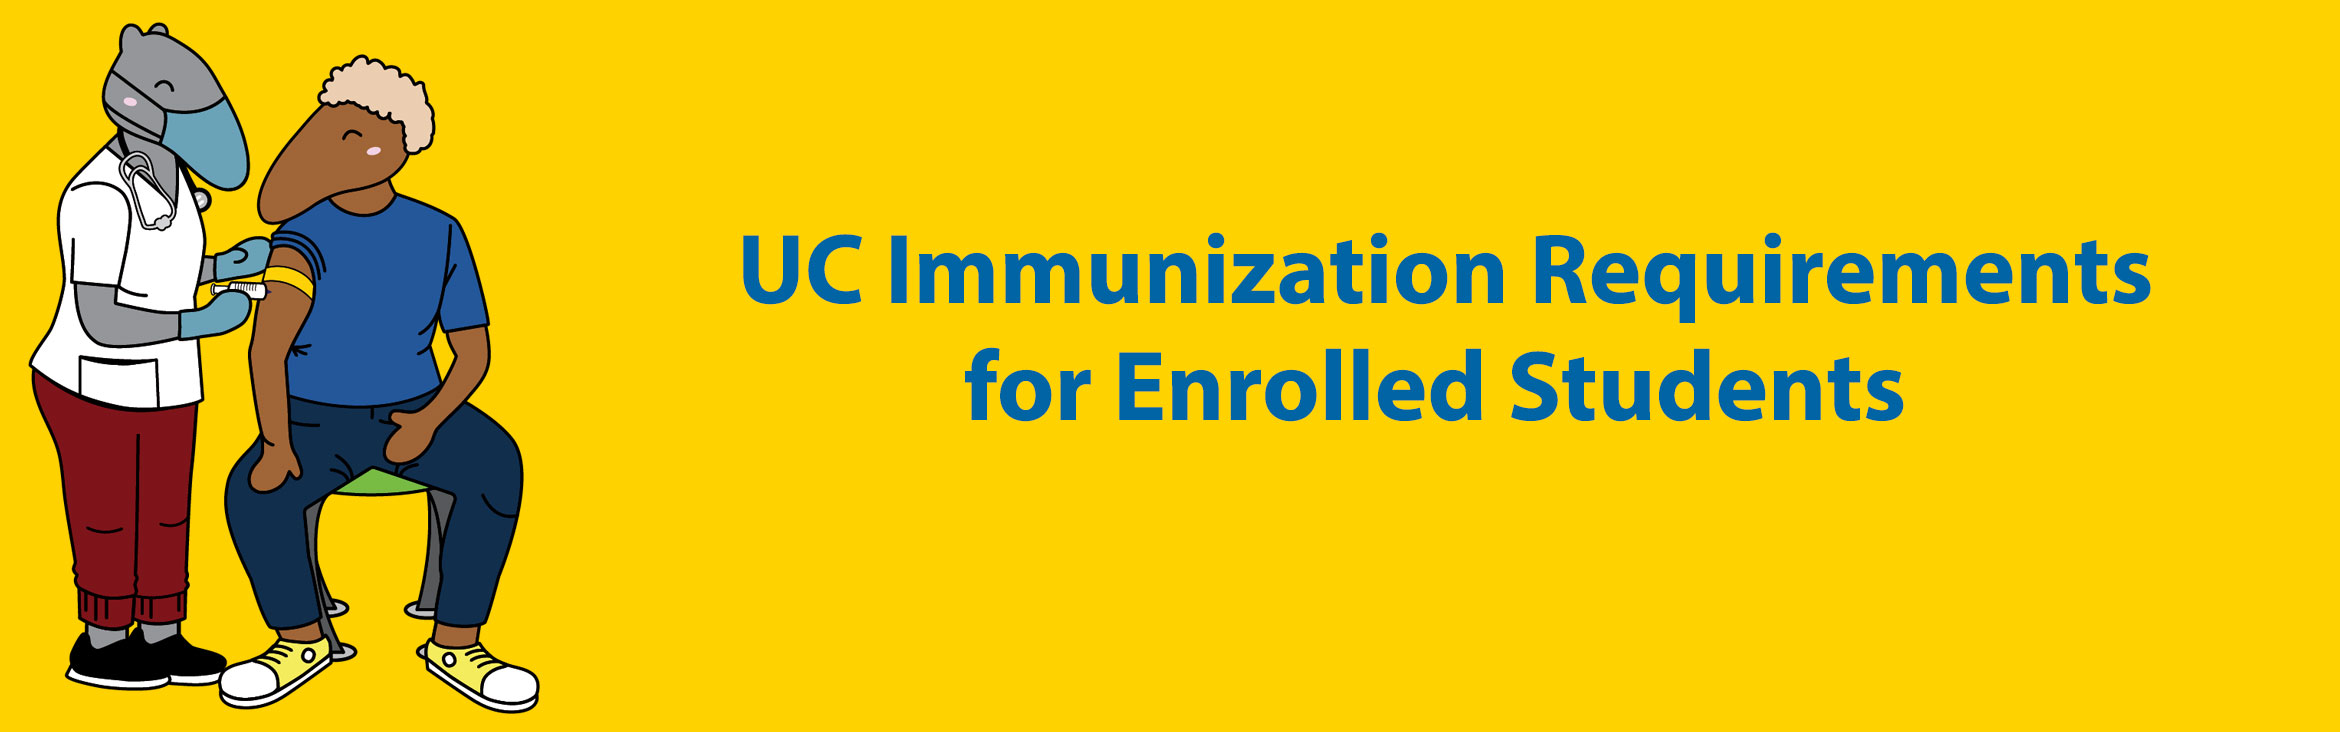 UC Immunization Requirements for Enrolled Students 